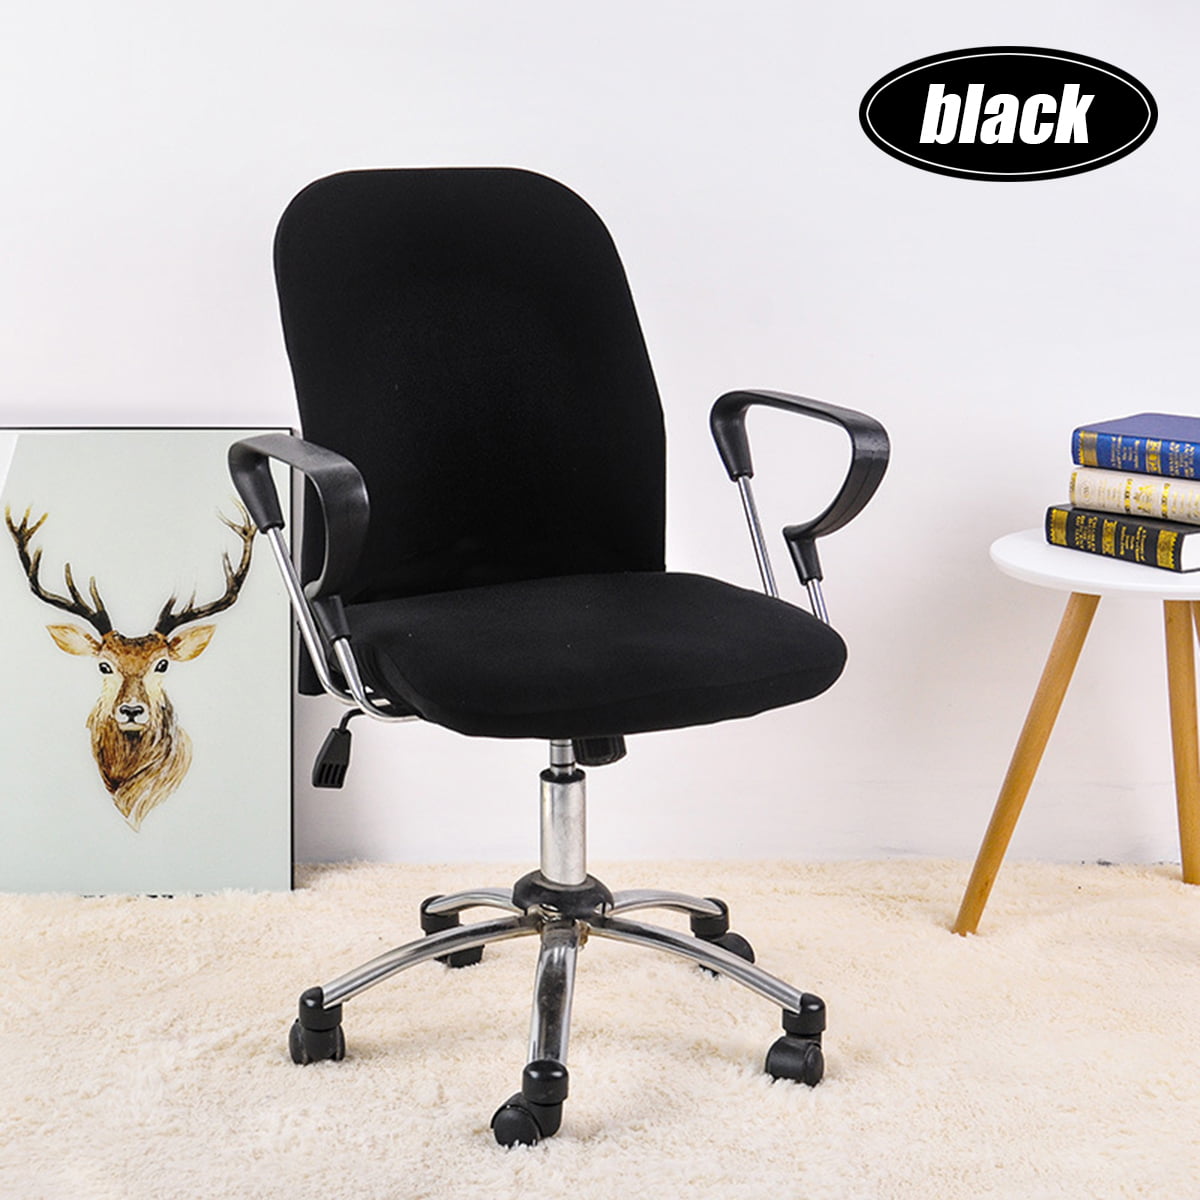 Modern Style Computer Chair Covers,Elastic Spandex Office Chair Seat ...